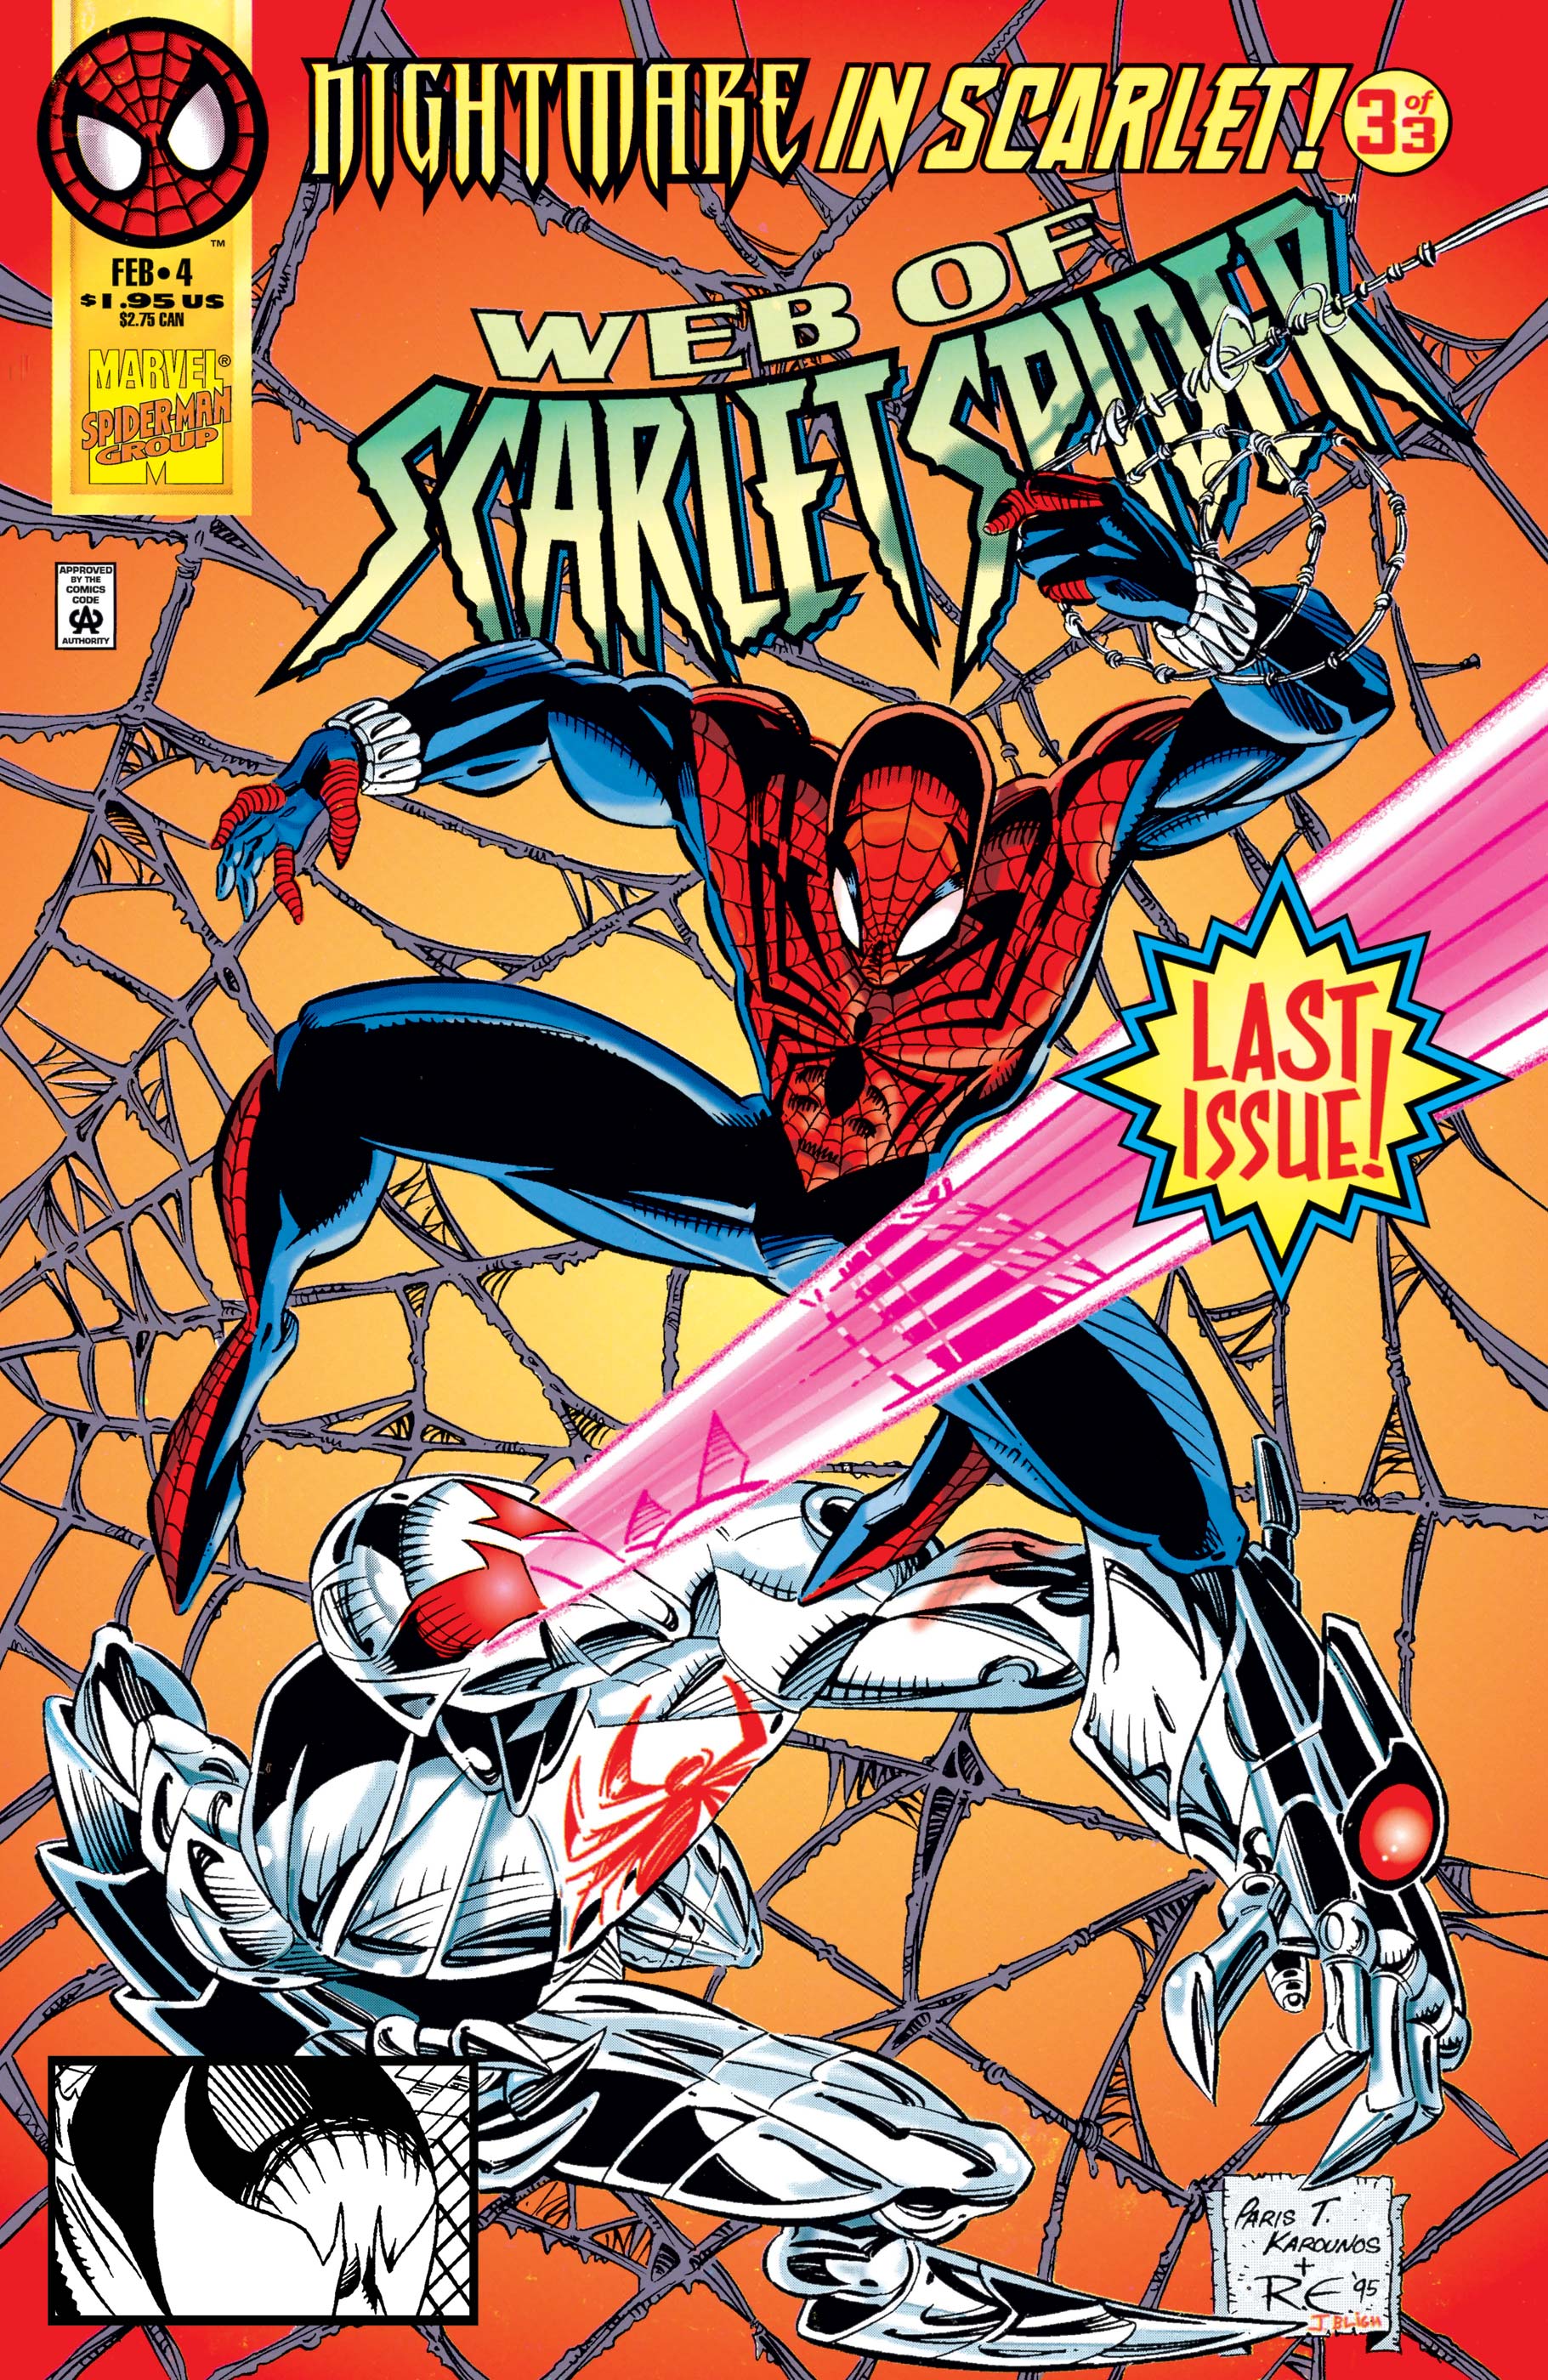 Web of the scarlet spider